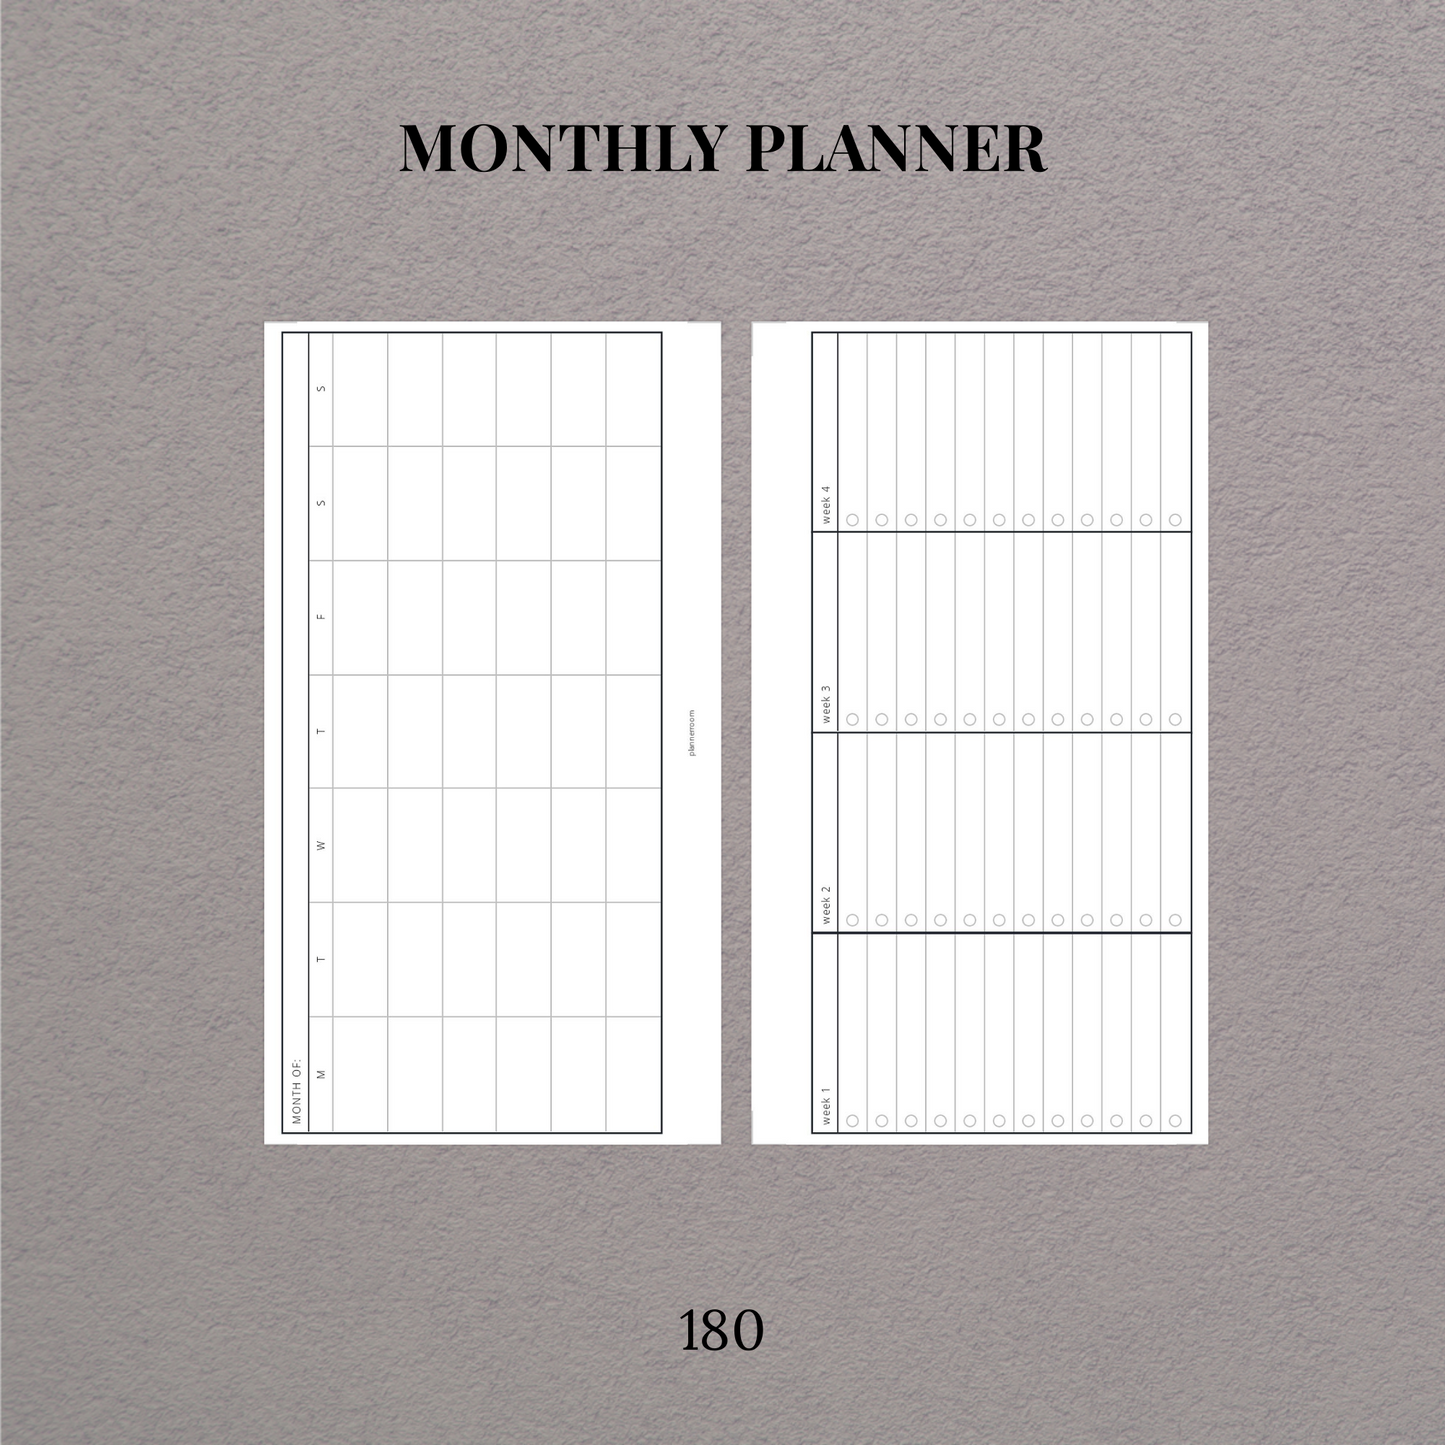 Monthly planner - 180